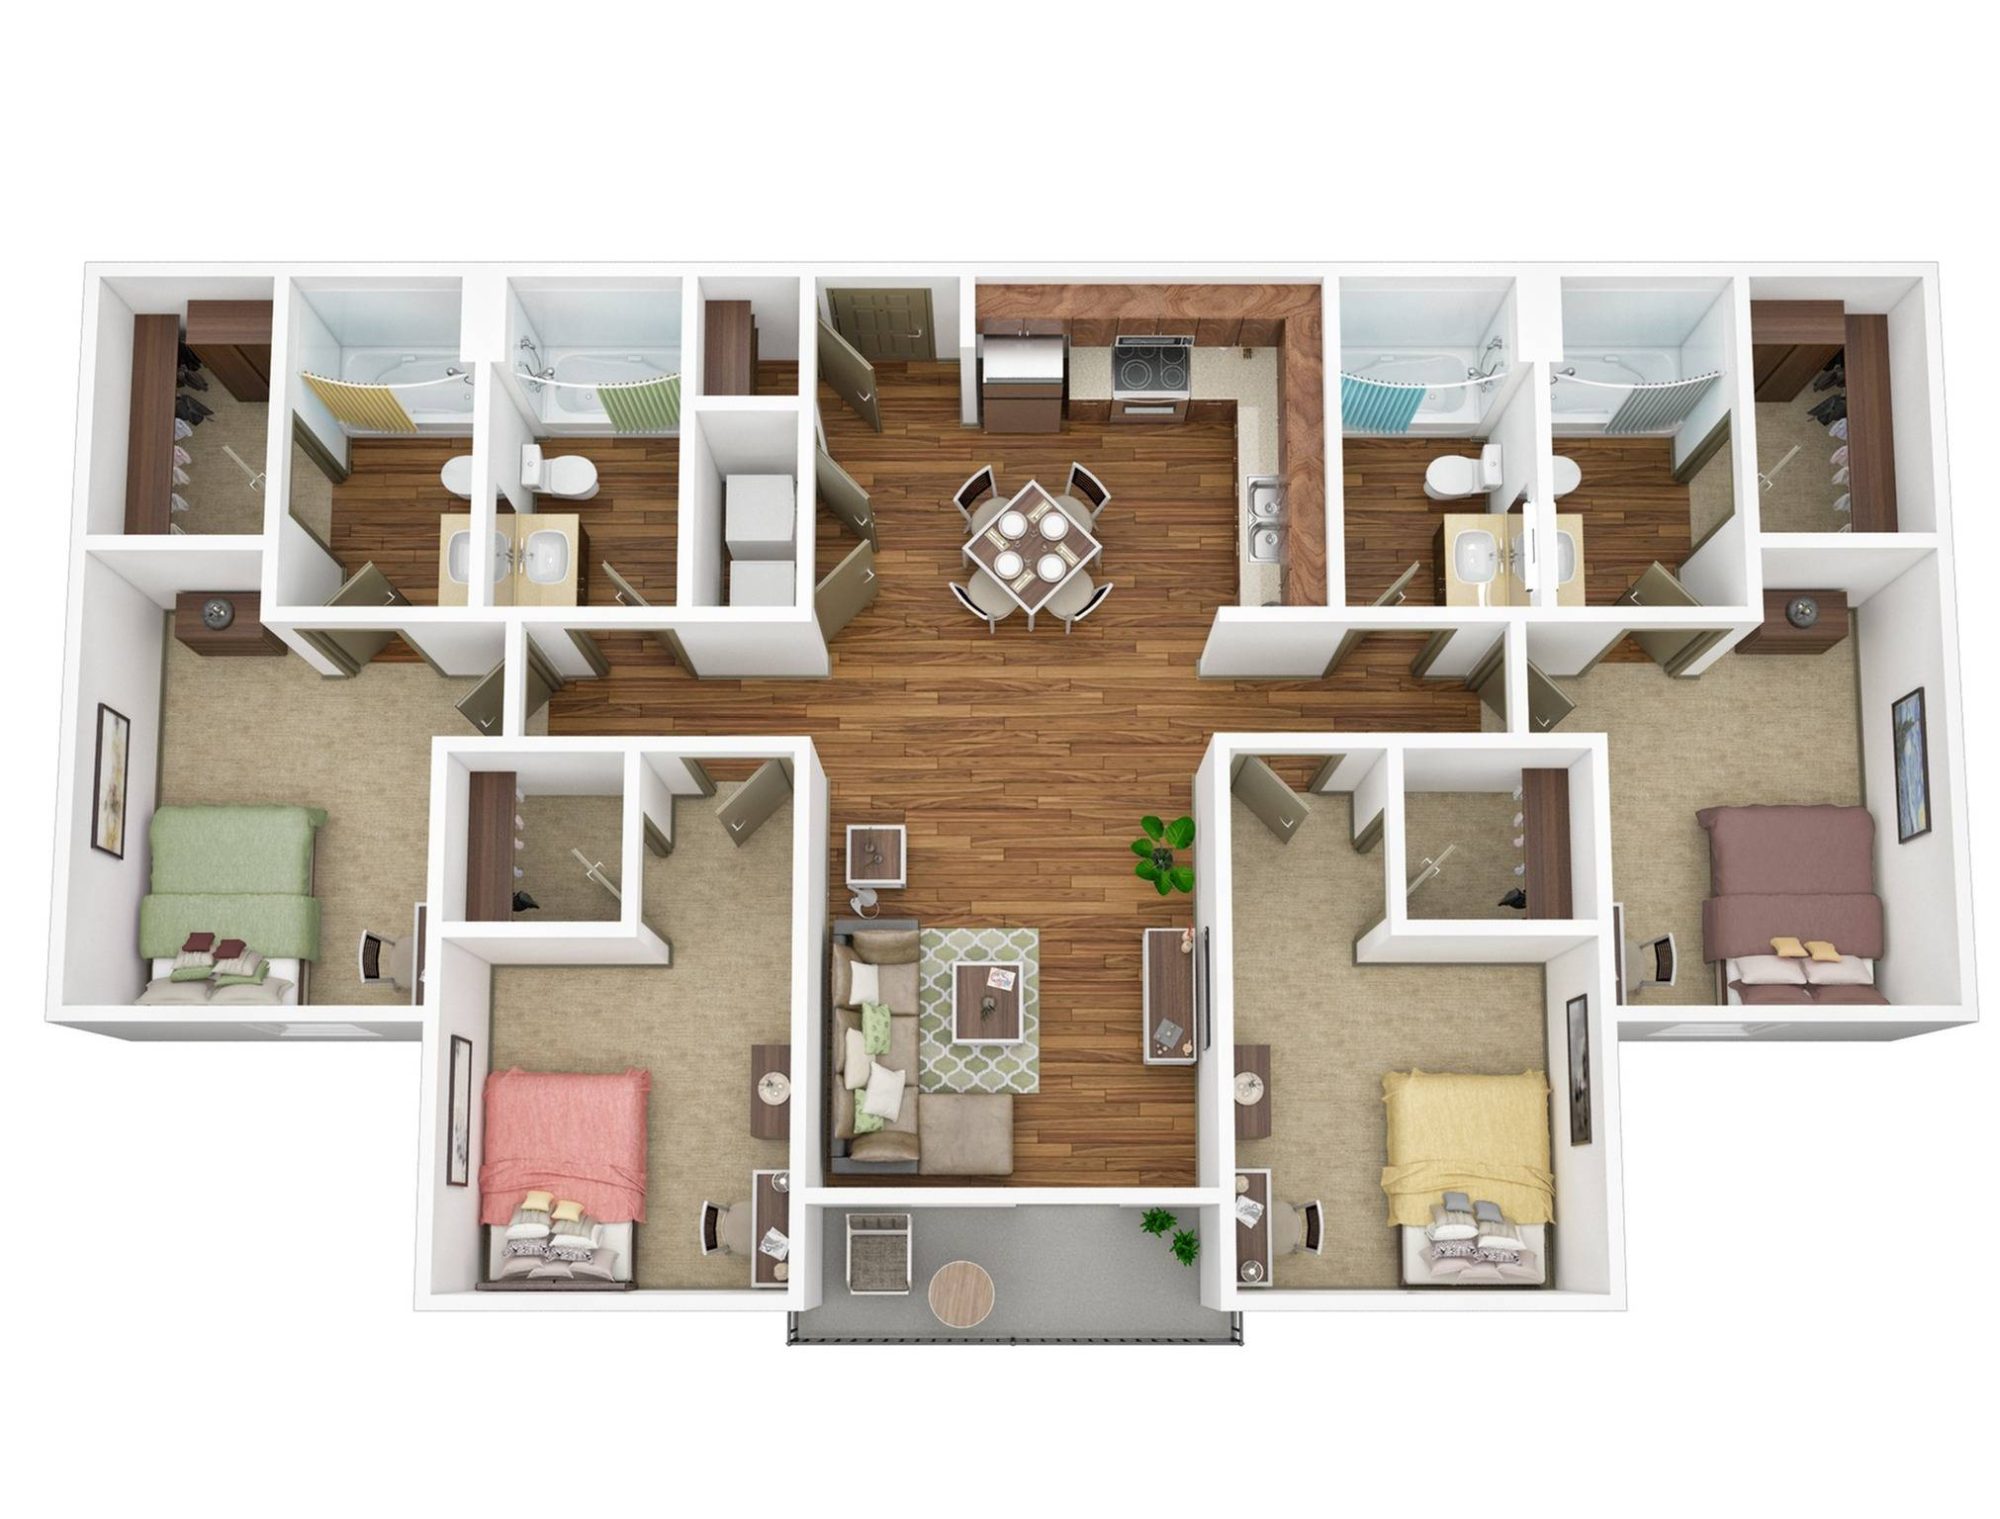 A 3D image of the 4BR/4BA – Silver floorplan, a 1472 squarefoot, 4 bed / 4 bath unit